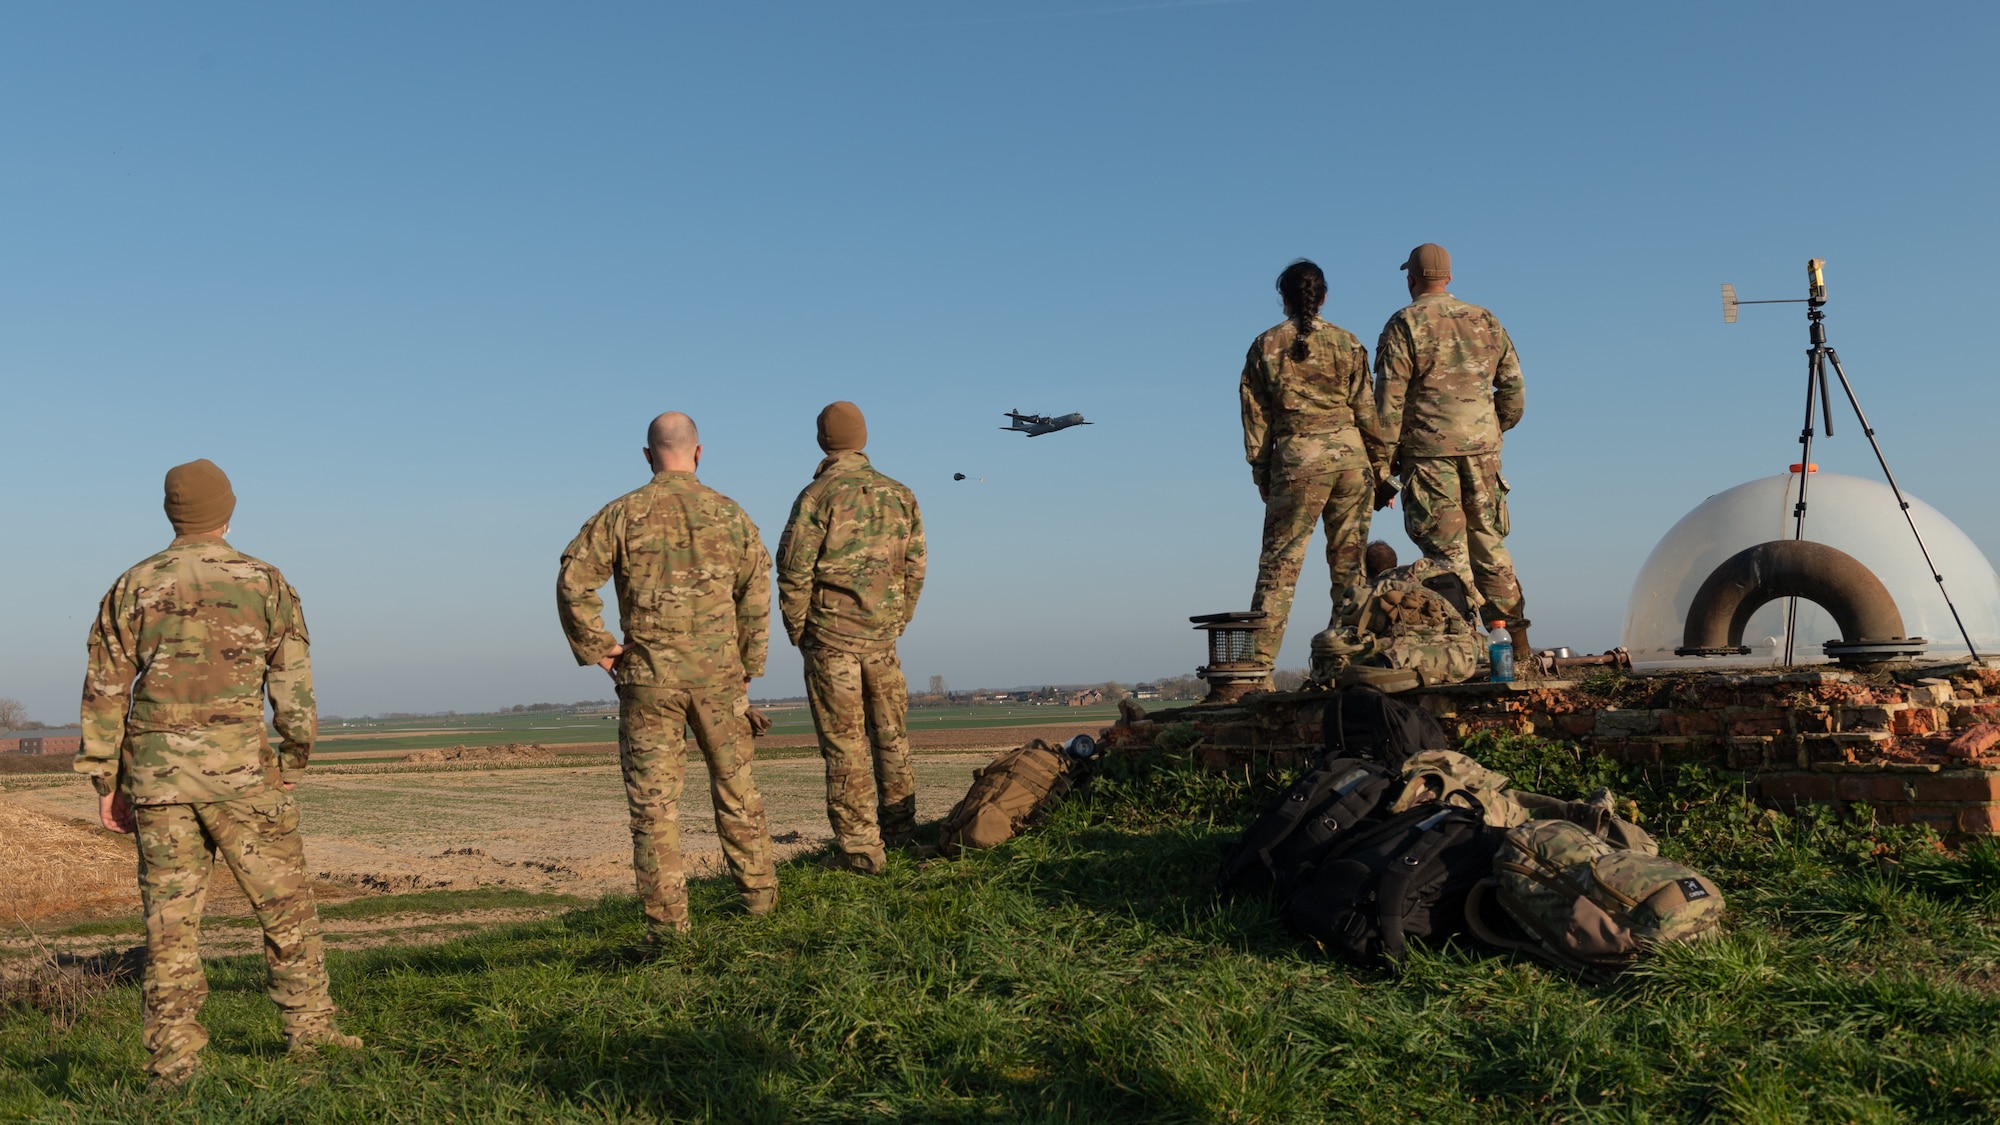 Airmen standing on a hill, looking at a plane in the distance.